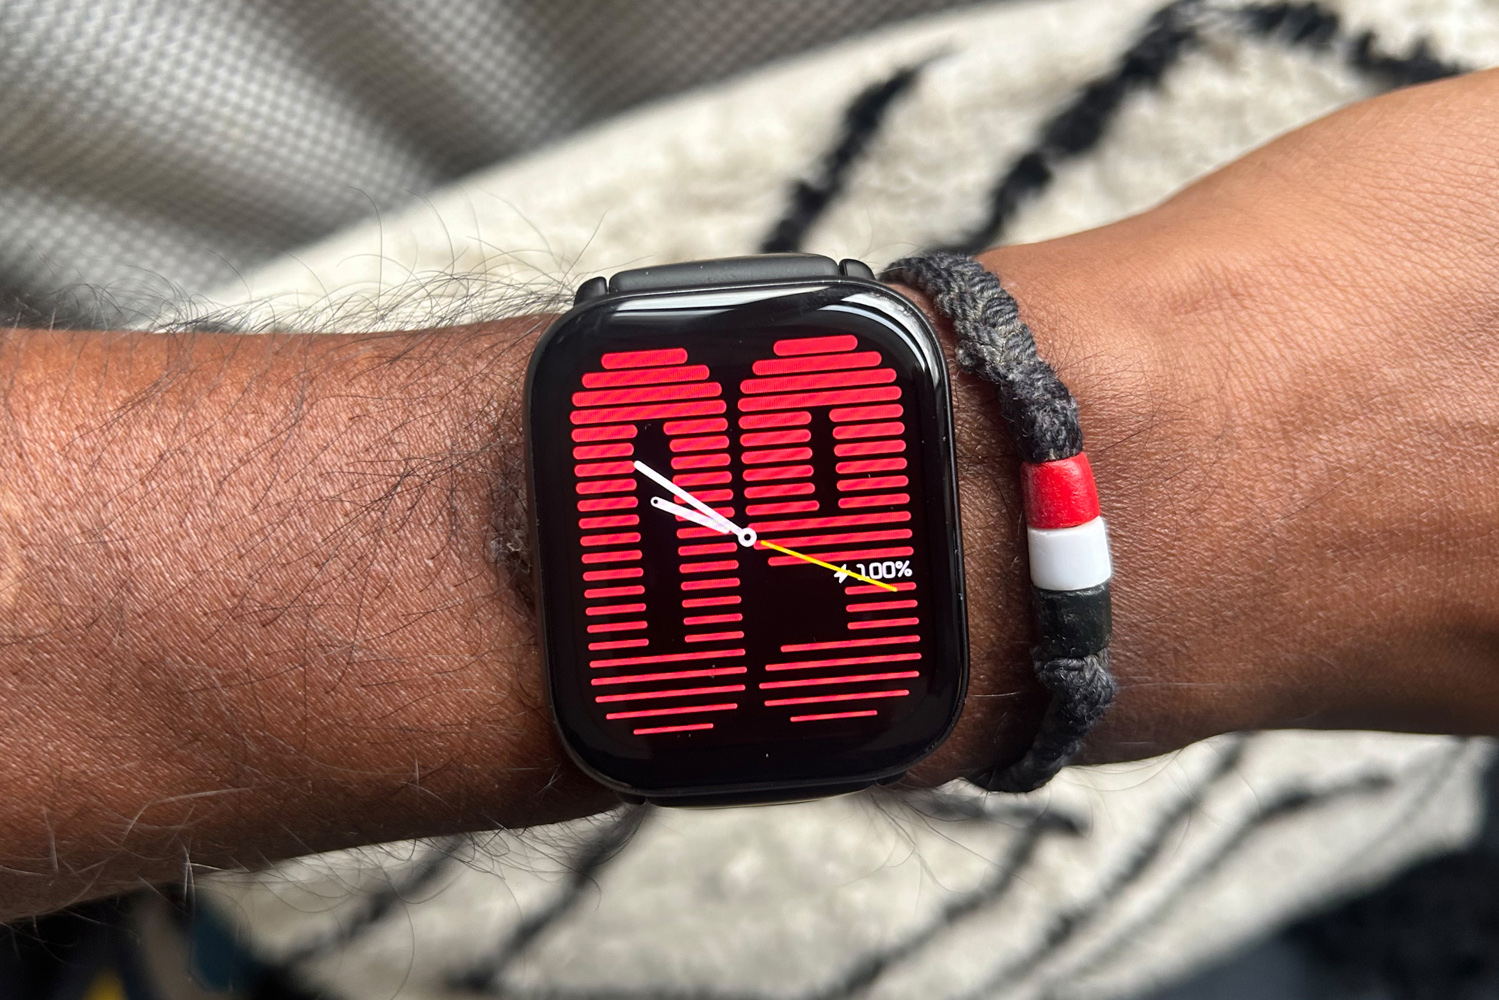 Amazfit Active Smartwatch in review - Well-made, surprisingly